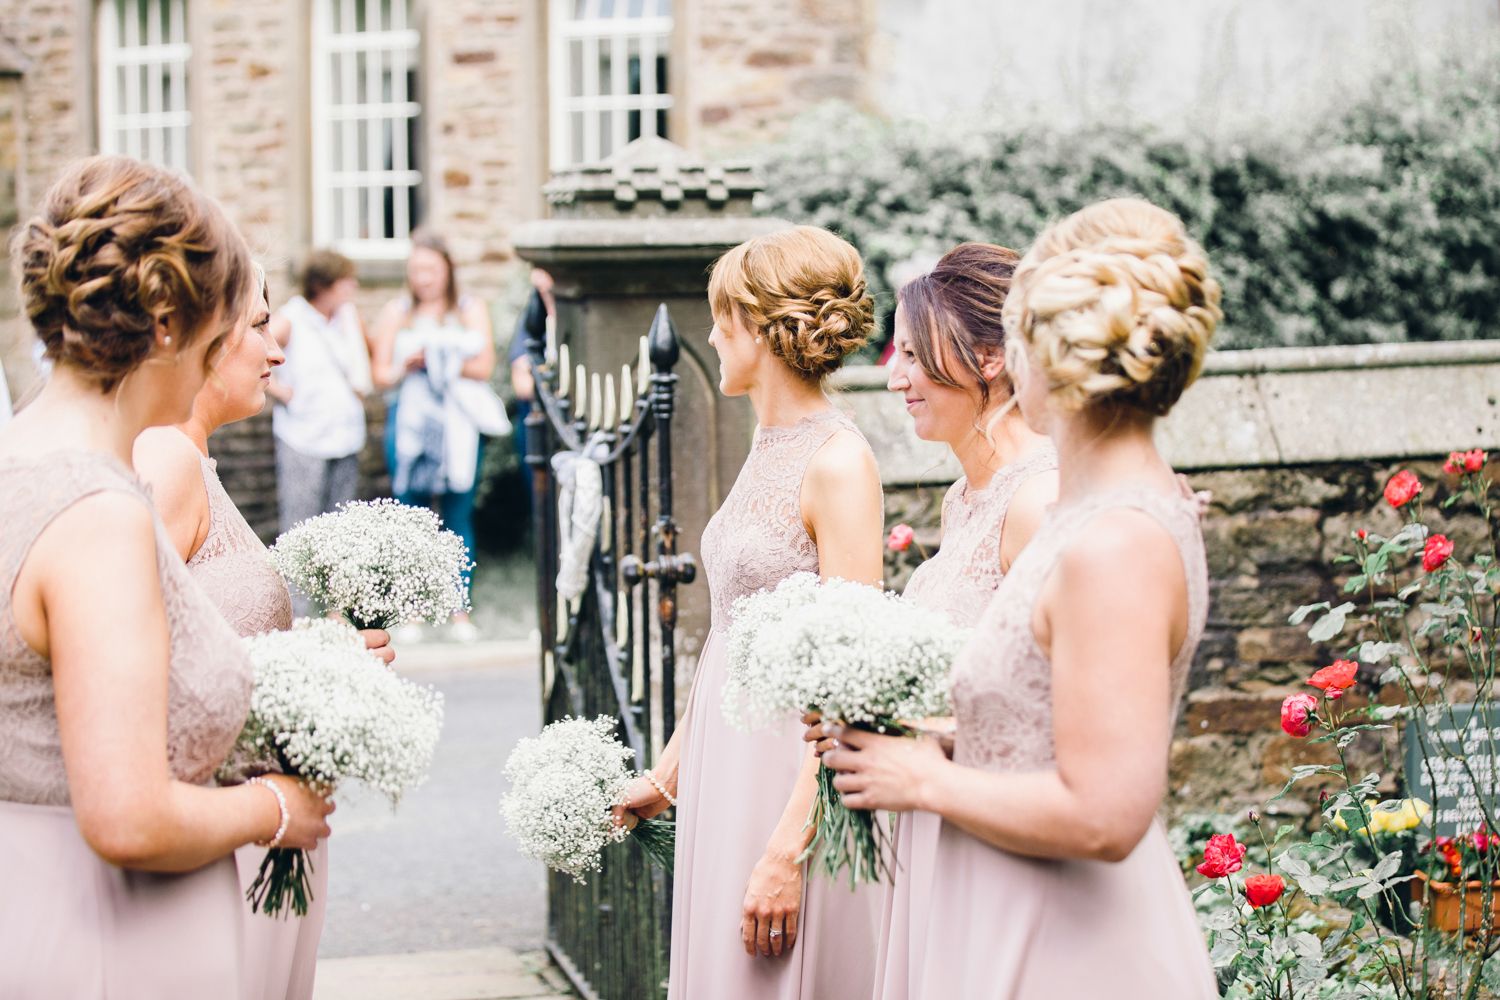 Wedding Hairstyles For The Bridal Party & All Hair Types